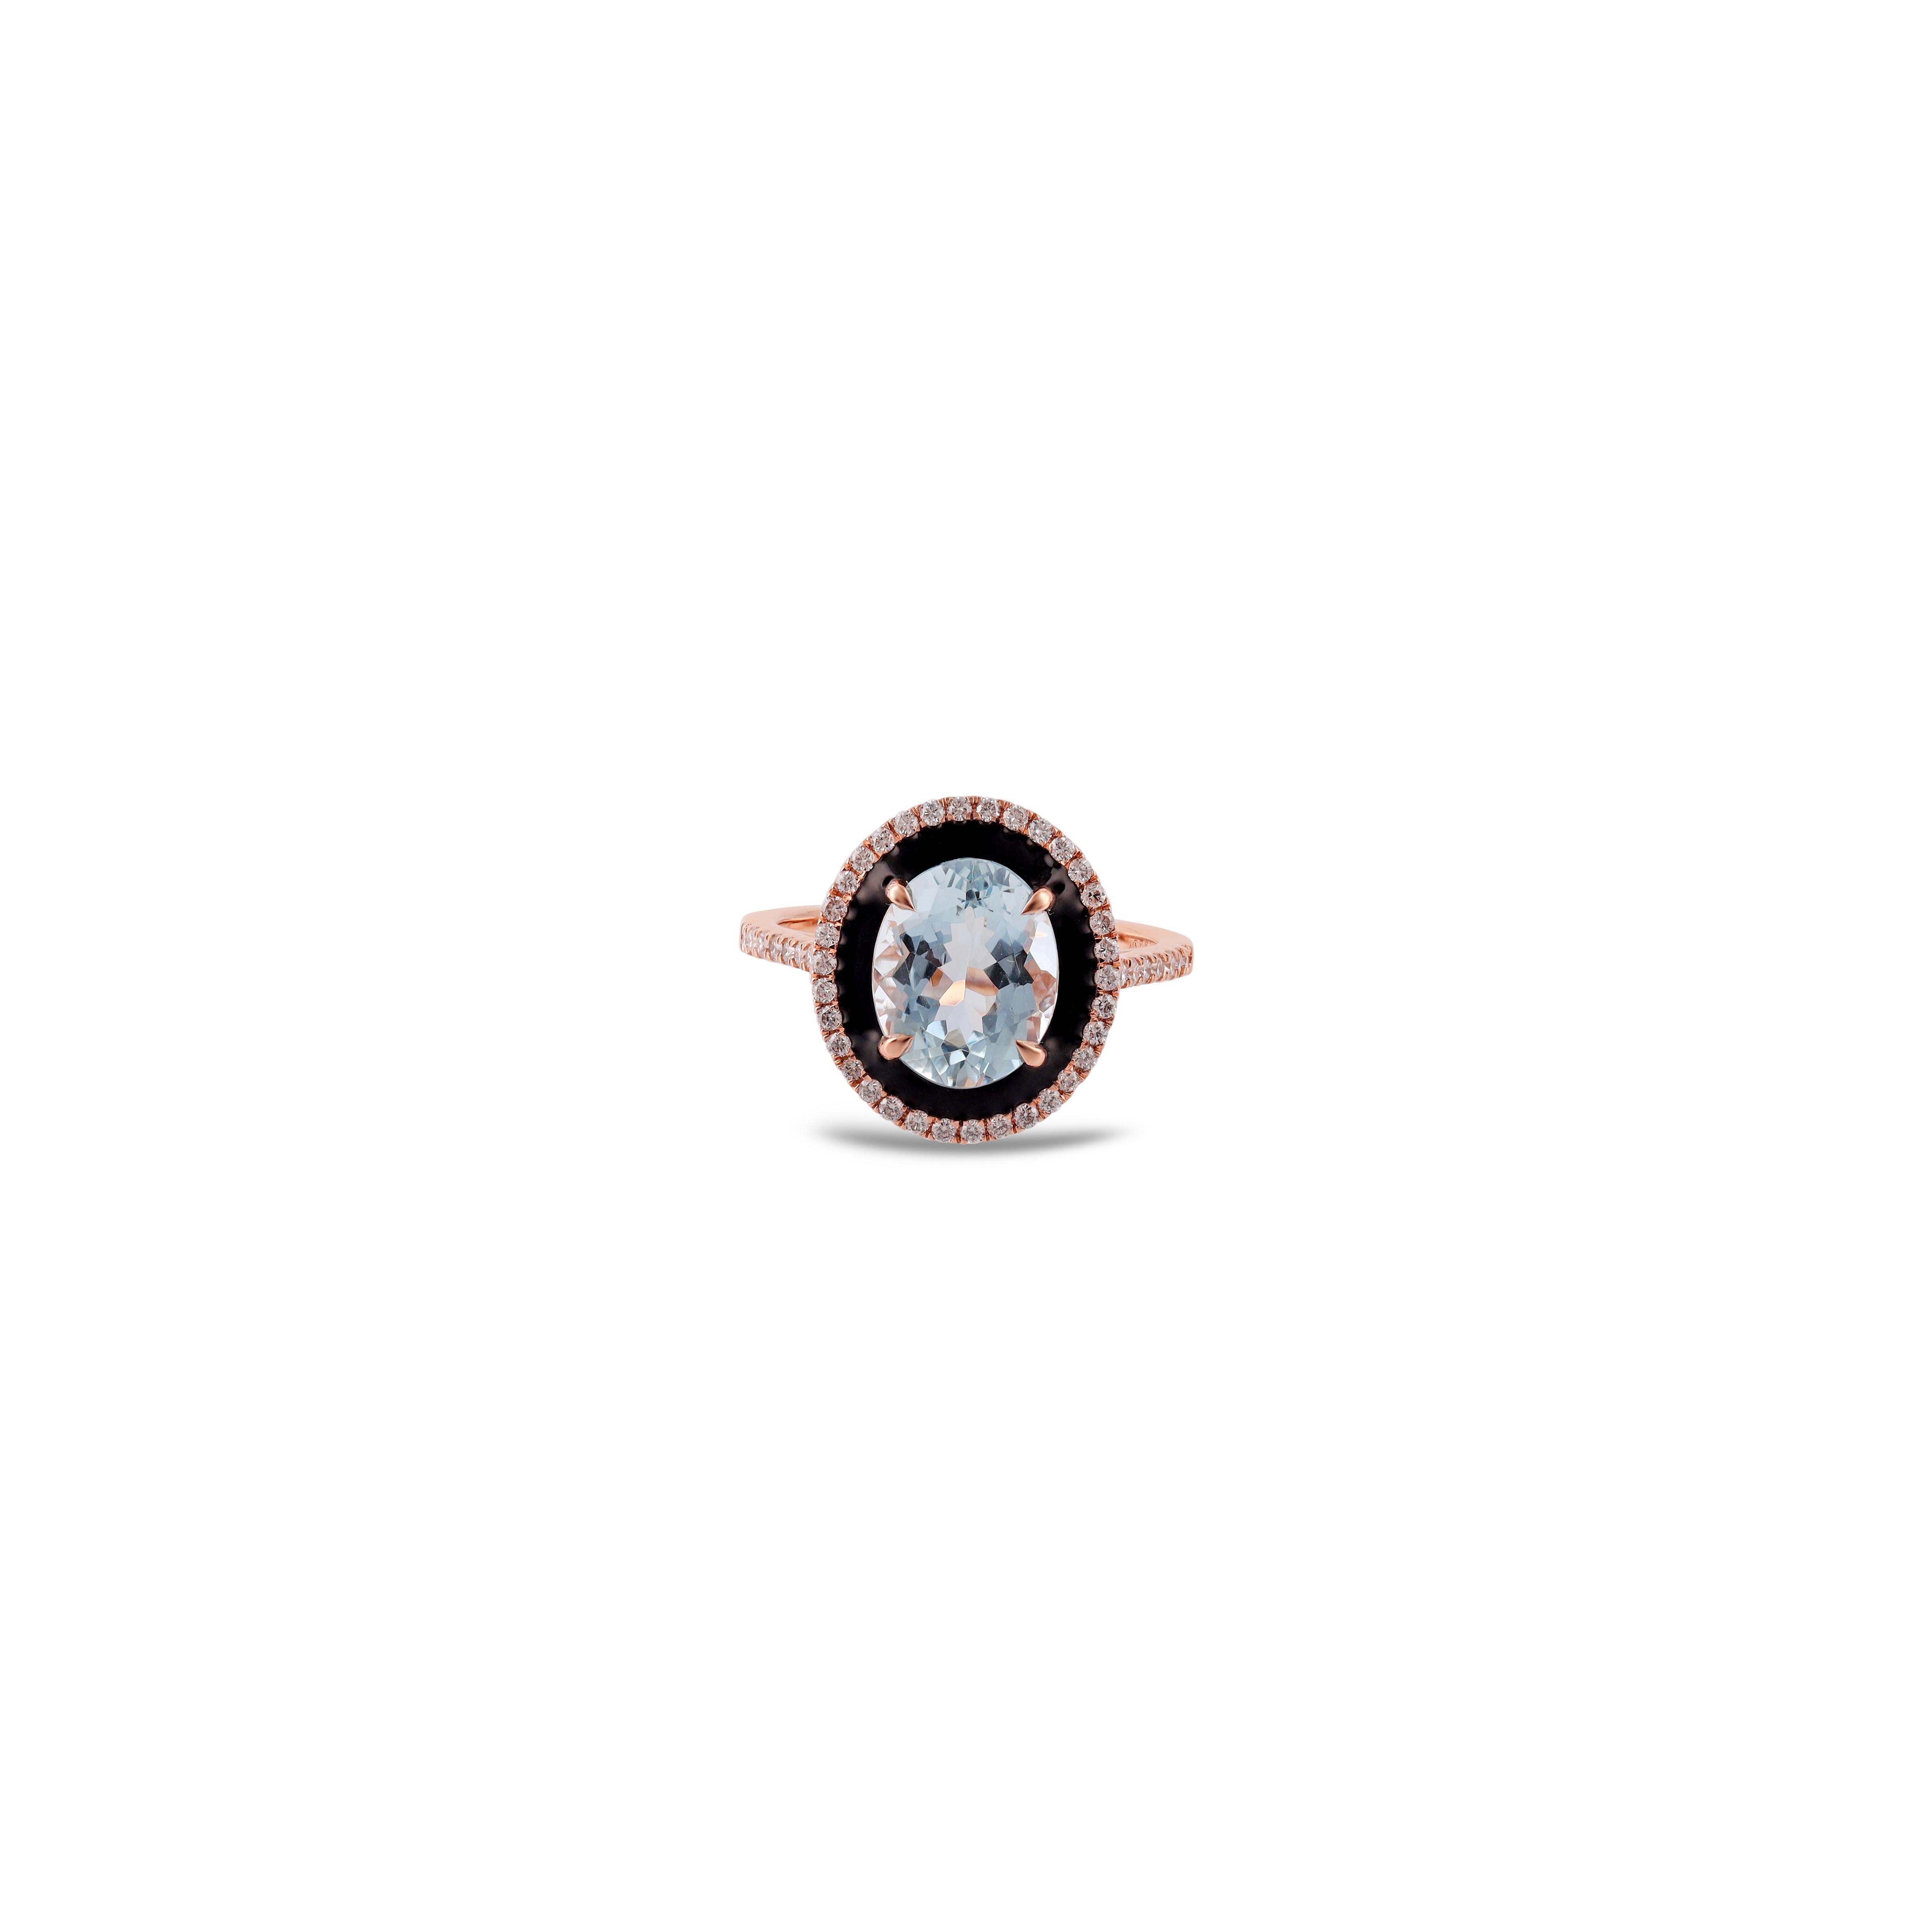 This is an elegant Aquamarine & Diamond ring studded in 18k Rose gold features a fine quality of Oval-shaped Aquamarine 2.59 carats with 48 Diamond 0.37 carats this entire ring is made in 18k Rose gold, it is a classic ring.  

Custom